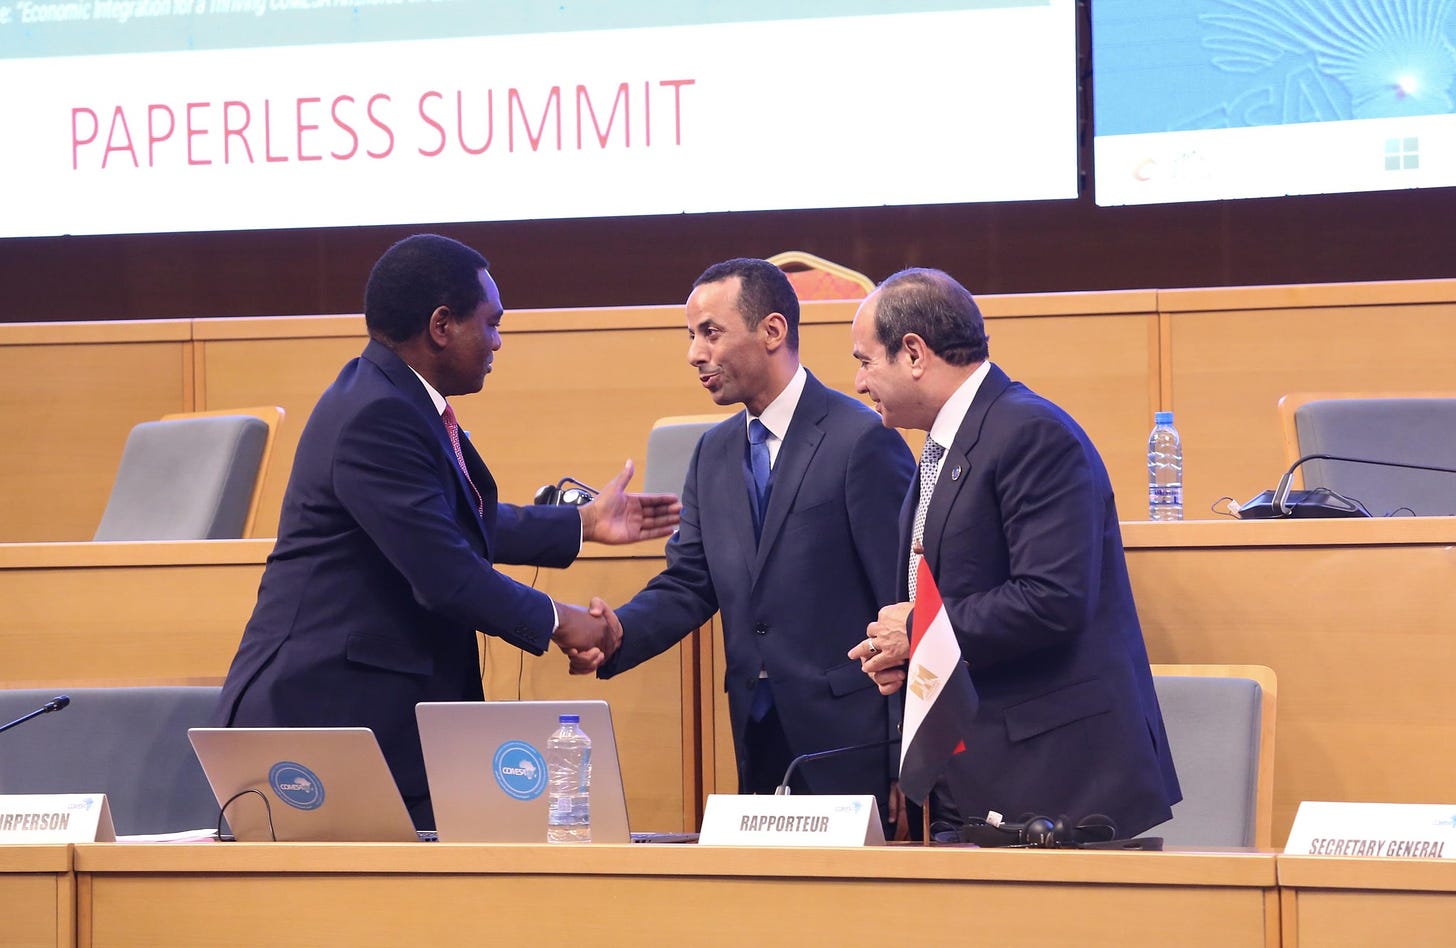 May be an image of 3 people, dais and text that says "PAPERLESS SUMMIT RPERSON COMESA RAPPORTEUR SECRETARYGENERAL GENERAL"